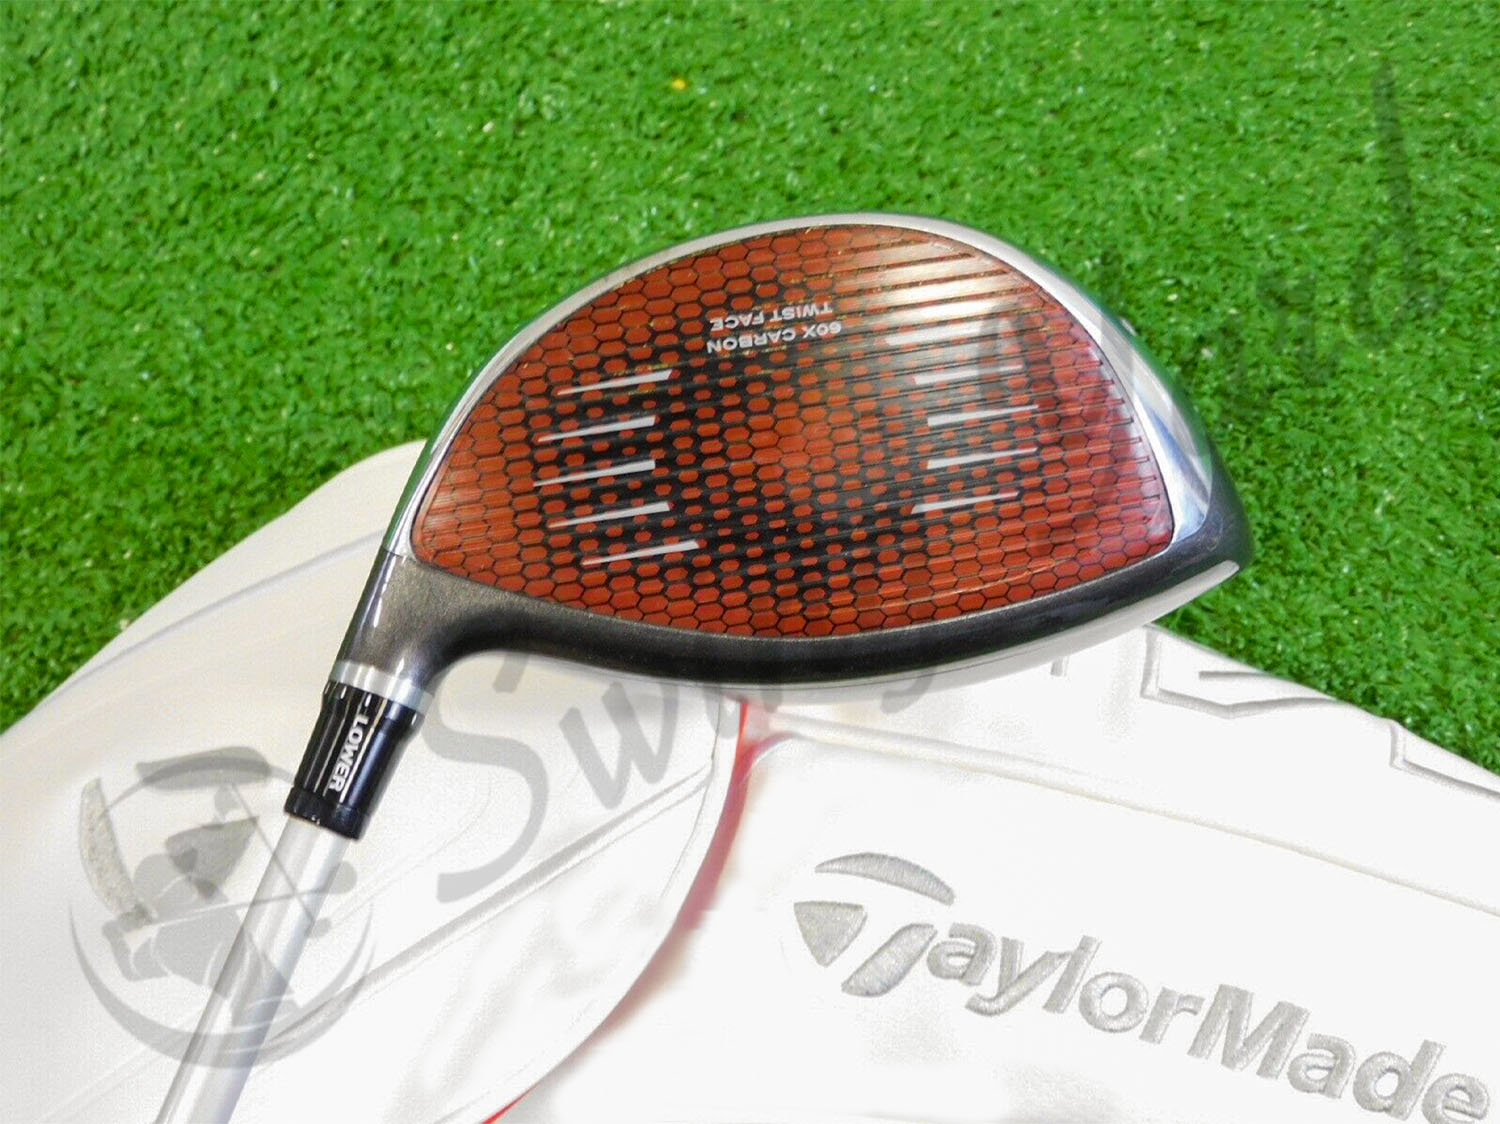 Women's TaylorMade Stealth driver club face